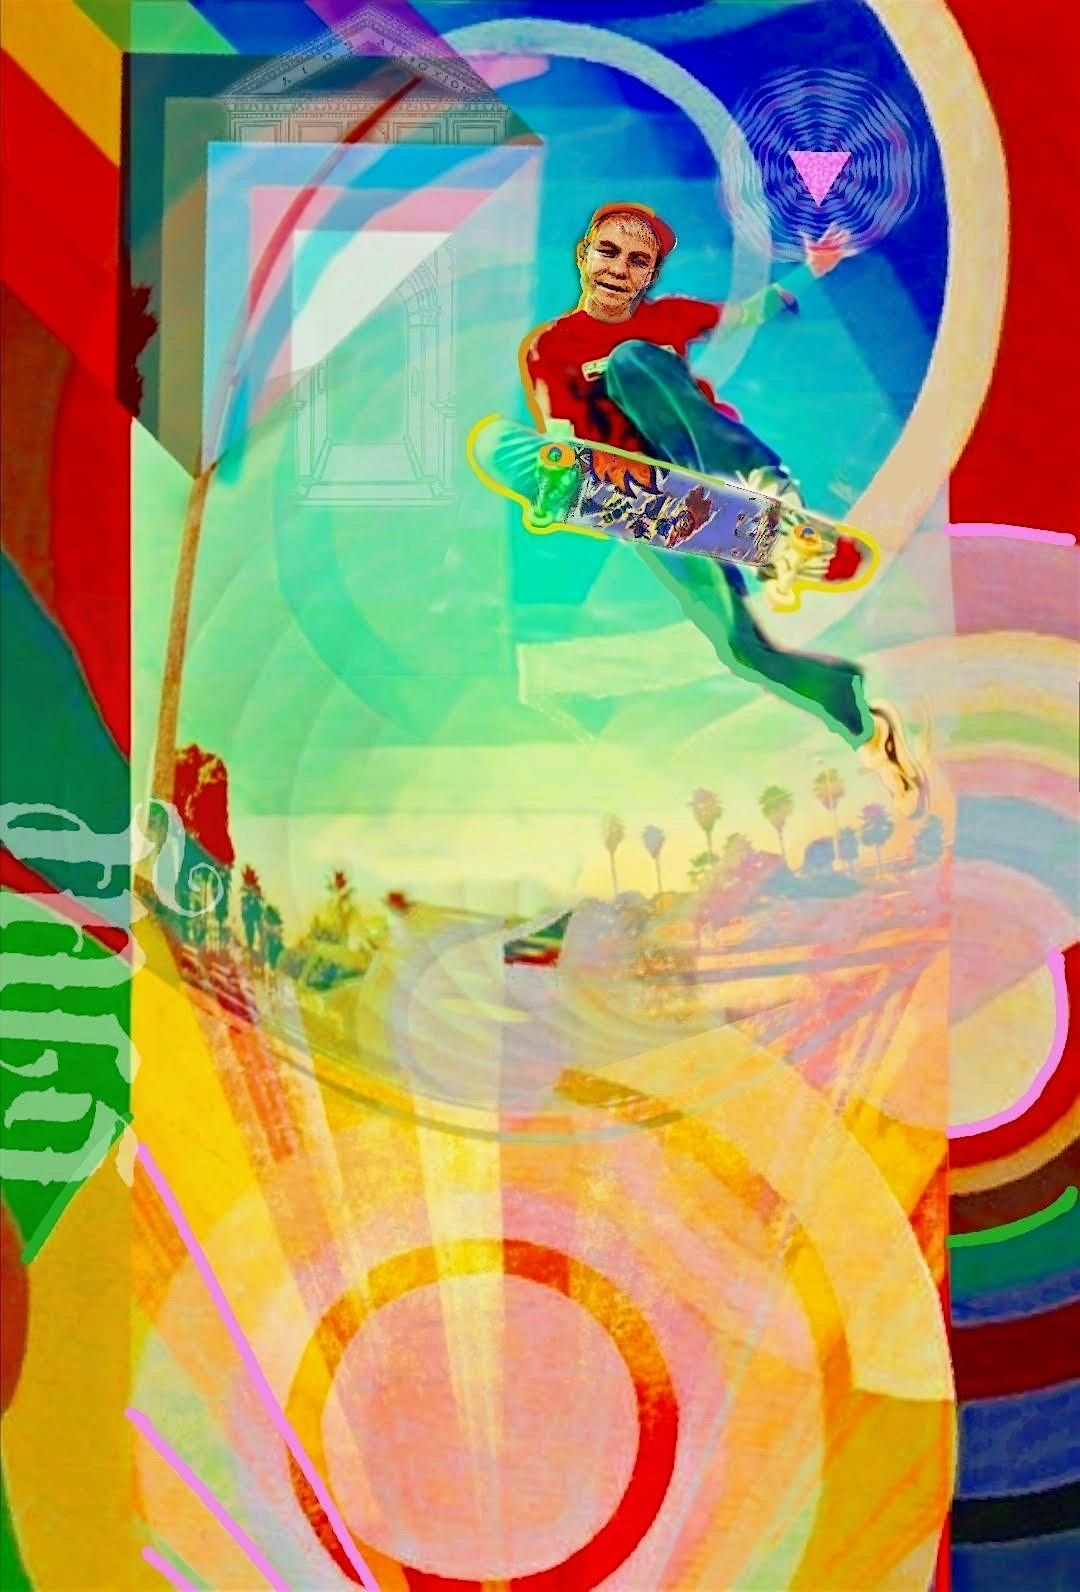 \u201cOut in the Streets\u201d LGBTQ Skateboarding Pop Up Exhibit at MASARTE Gallery